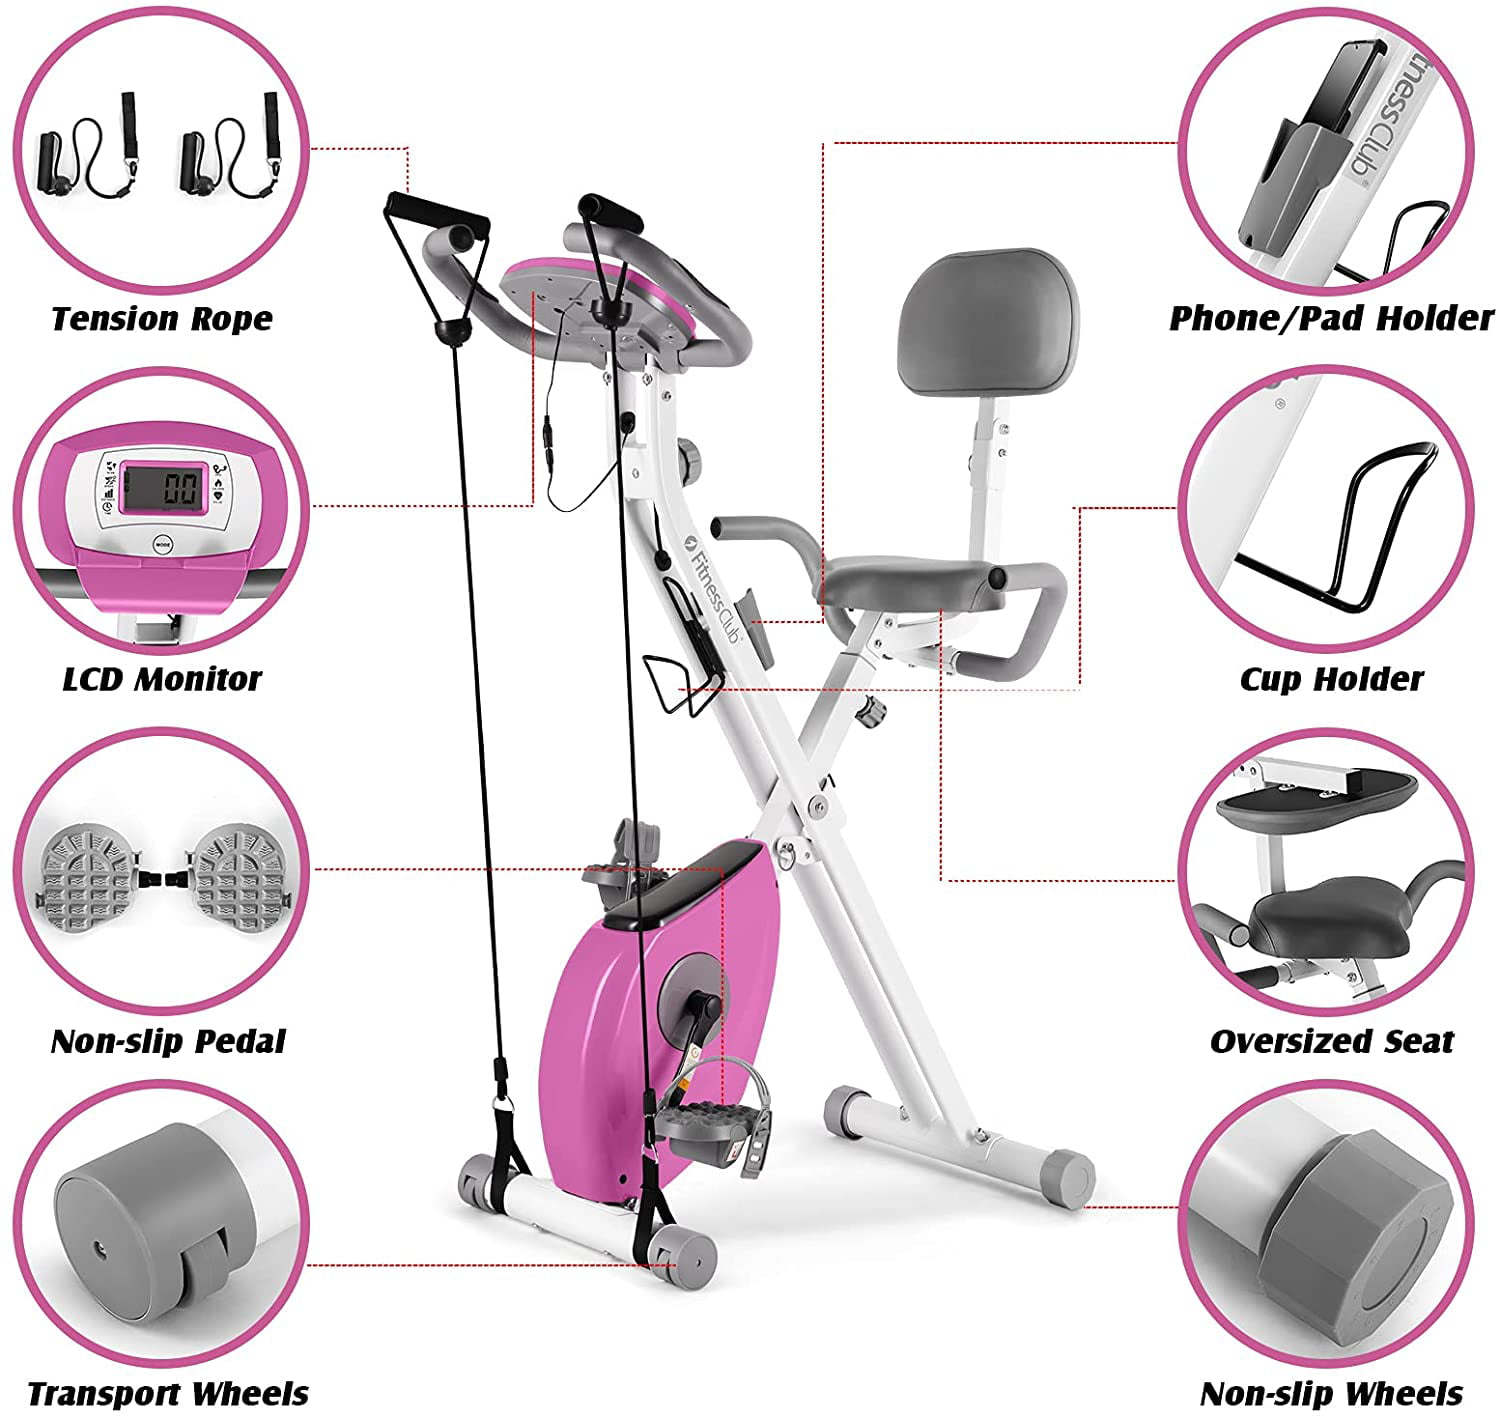 Details about   Folding Exercise Bike 8-Level Resistance Adjustable Seat LCD Home Body Workout 